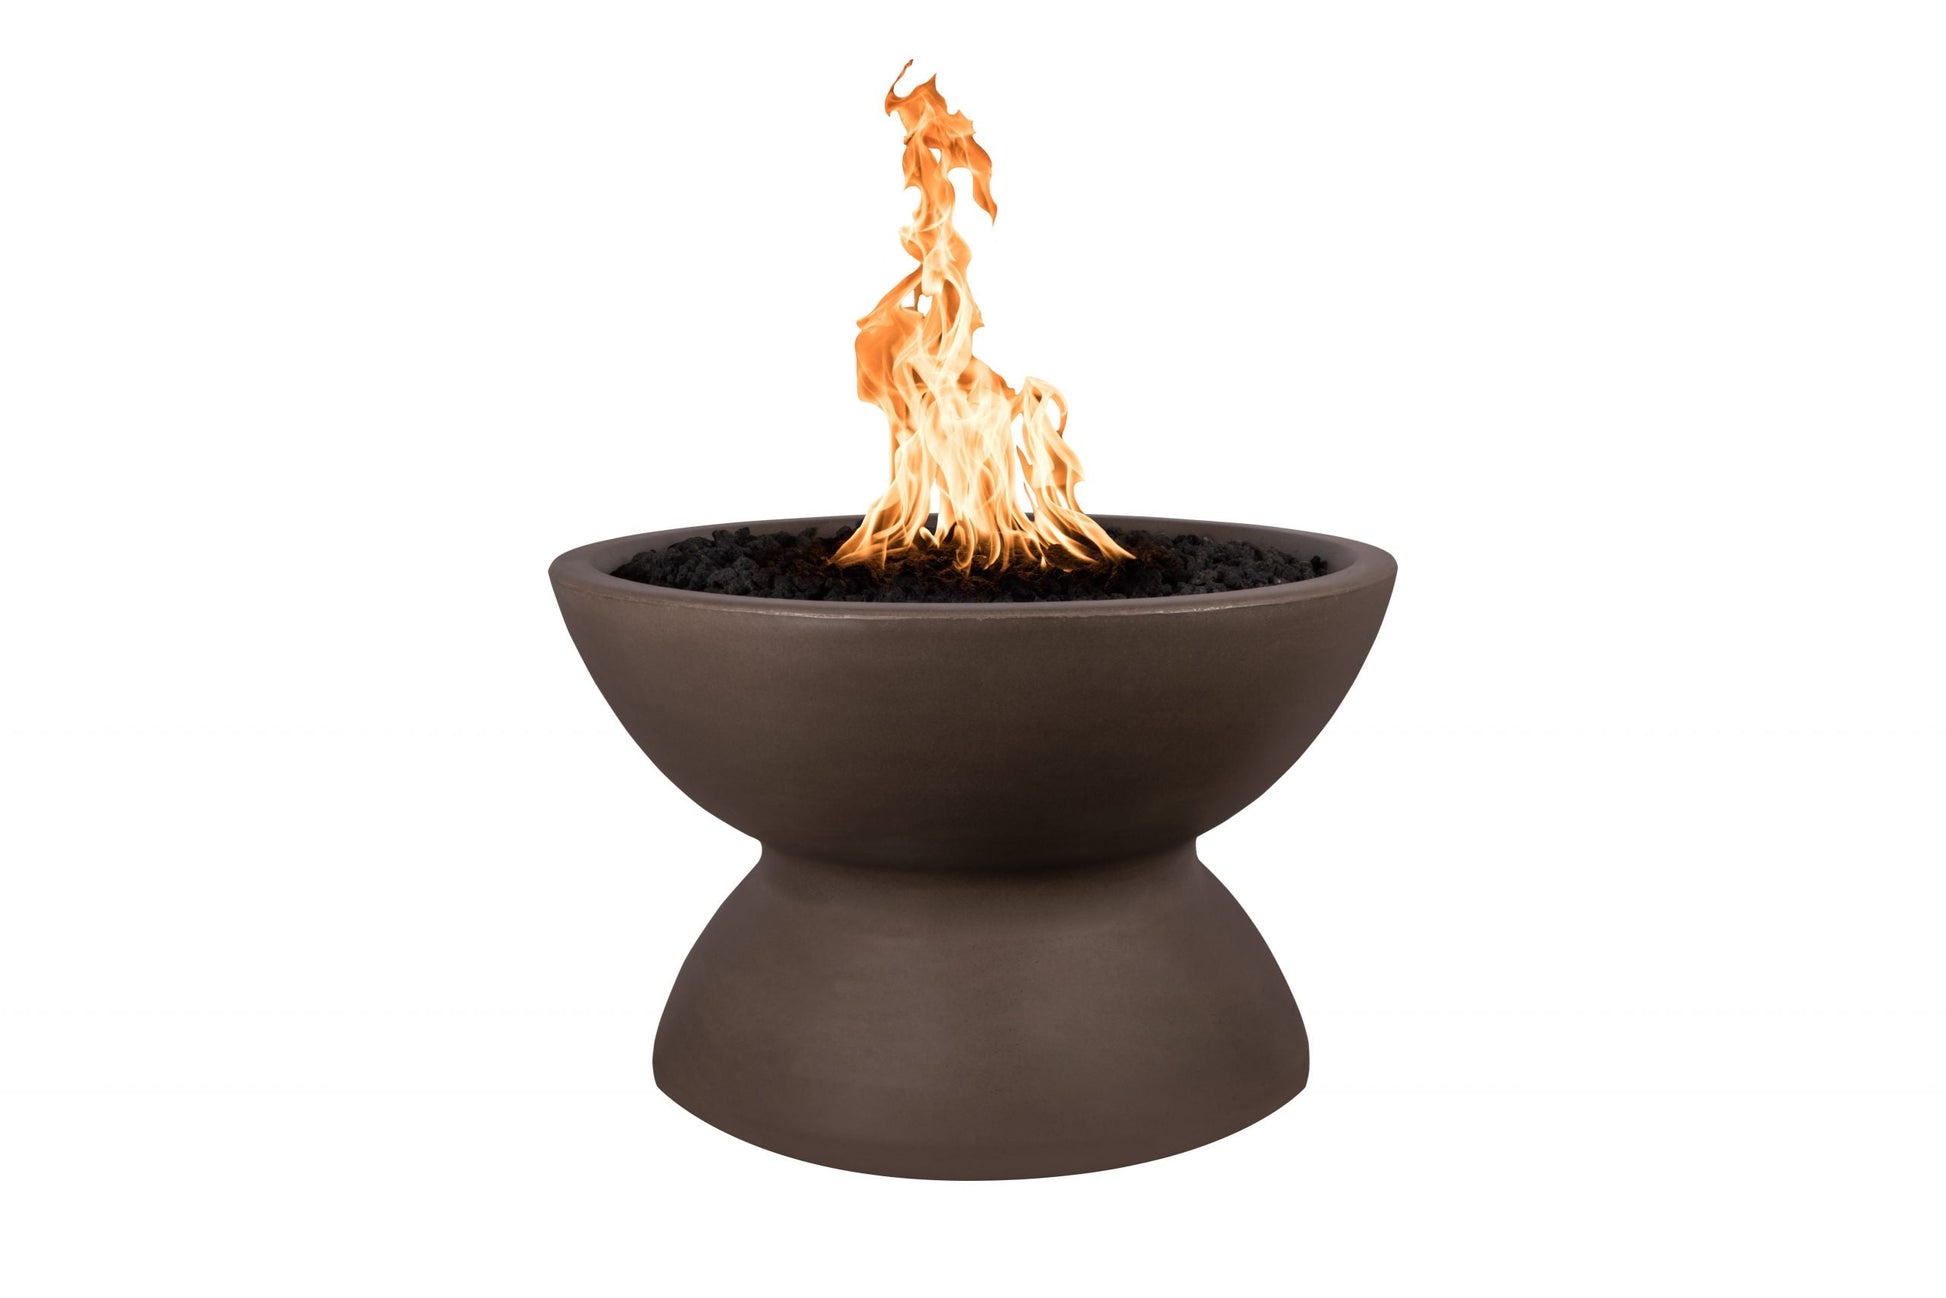 The Outdoor Plus Round Copa 33" Rustic White GFRC Concrete Natural Gas Fire Pit with 110V Electronic Ignition